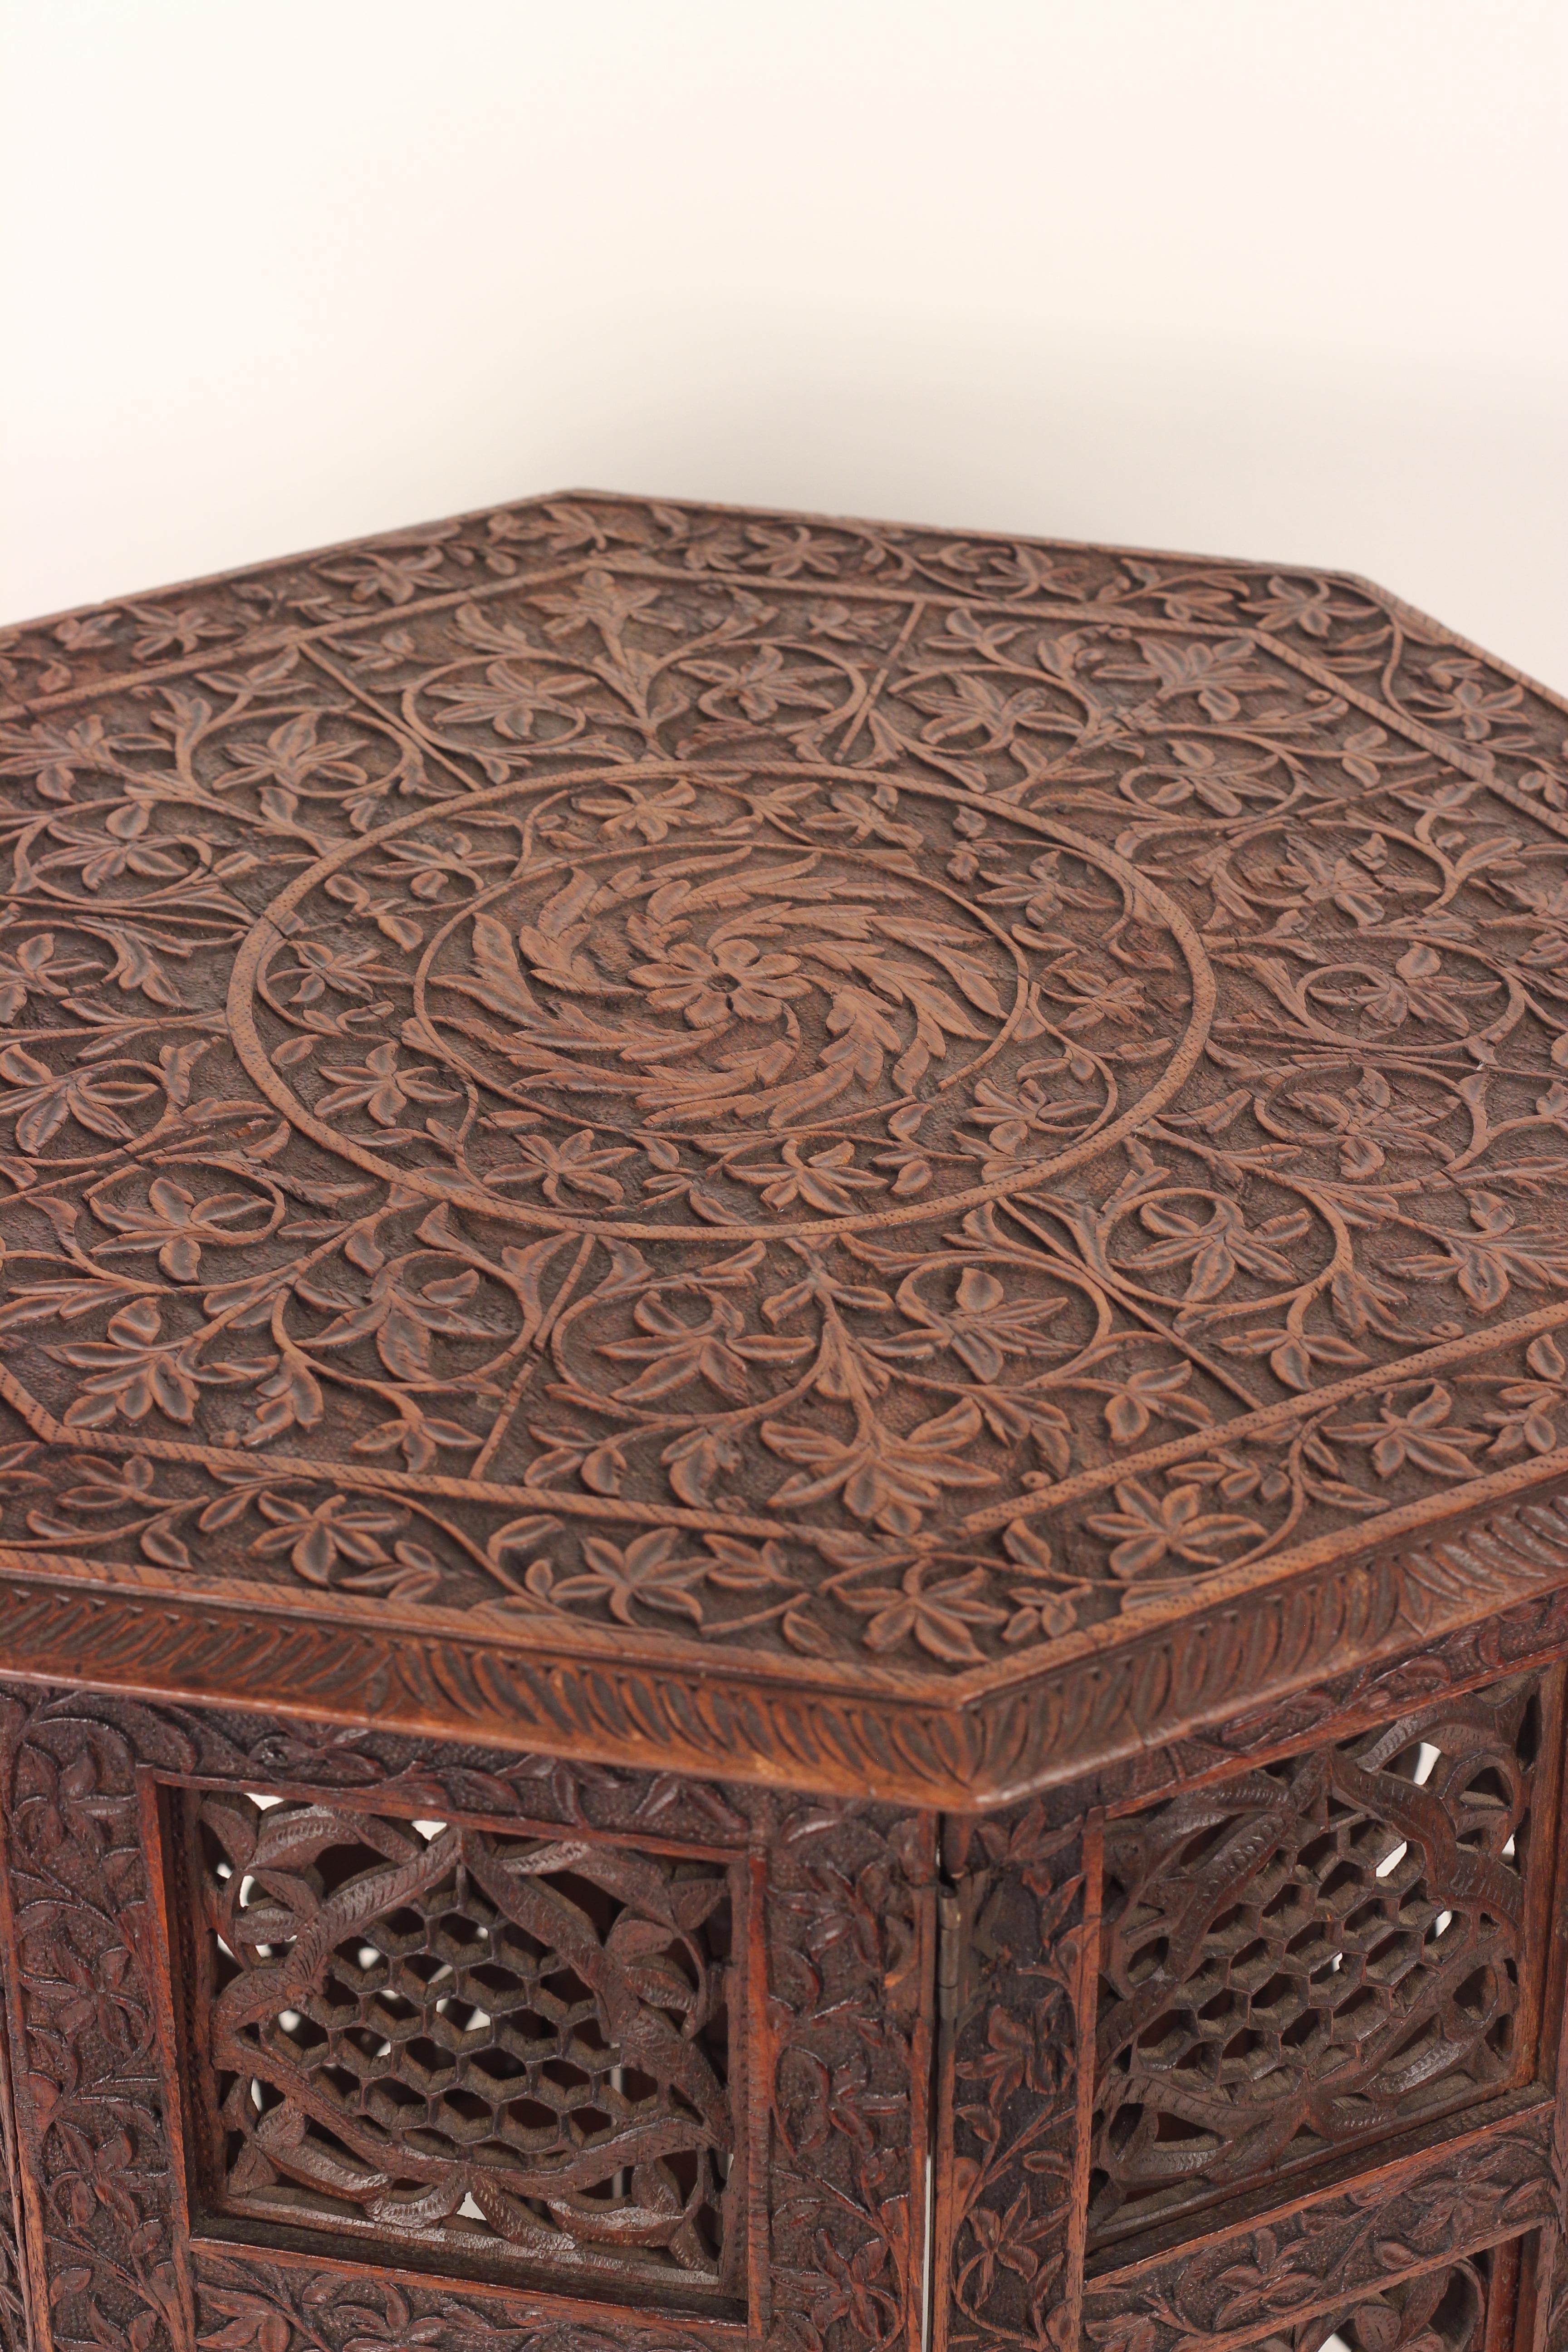 North African Boho Chic style 19th Century Hand Carved Wooden Moorish Octagonal Table For Sale